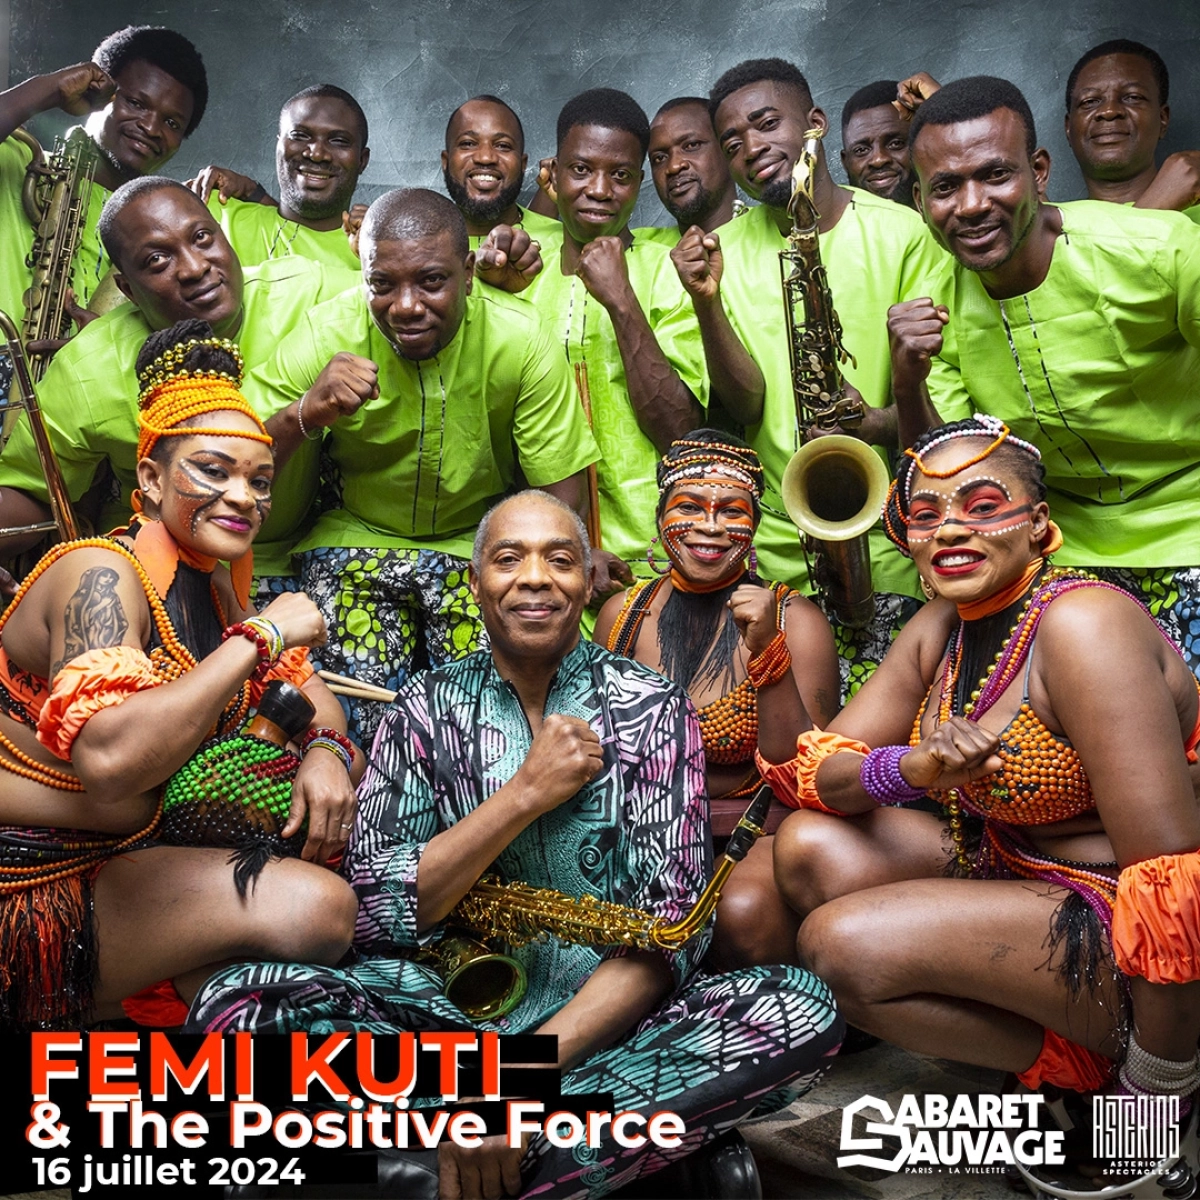 Femi Kuti and The Positive Force in der Cabaret Sauvage Tickets